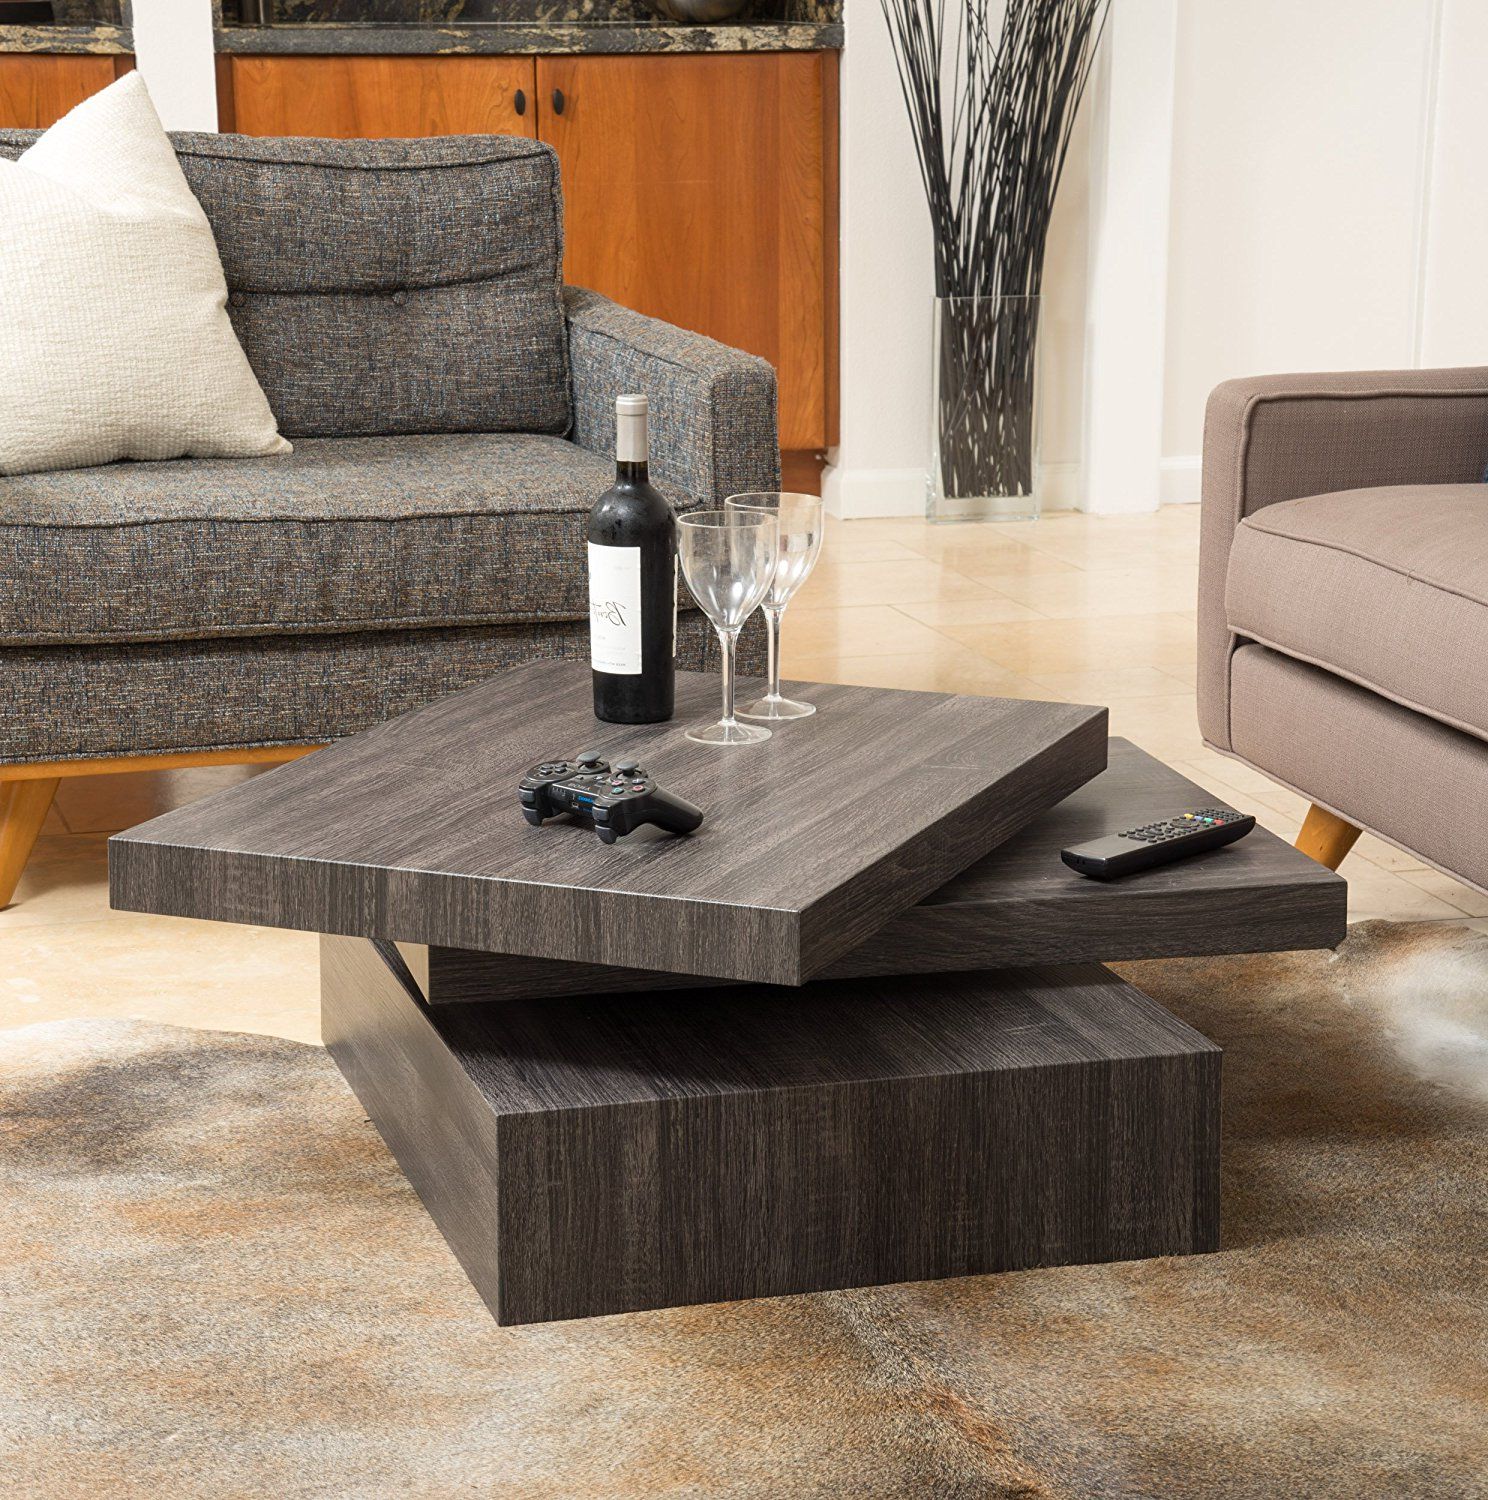 30 Thinks We Can Learn From This Living Room Coffee Table – Home Inside Simple Design Coffee Tables (Photo 13 of 15)